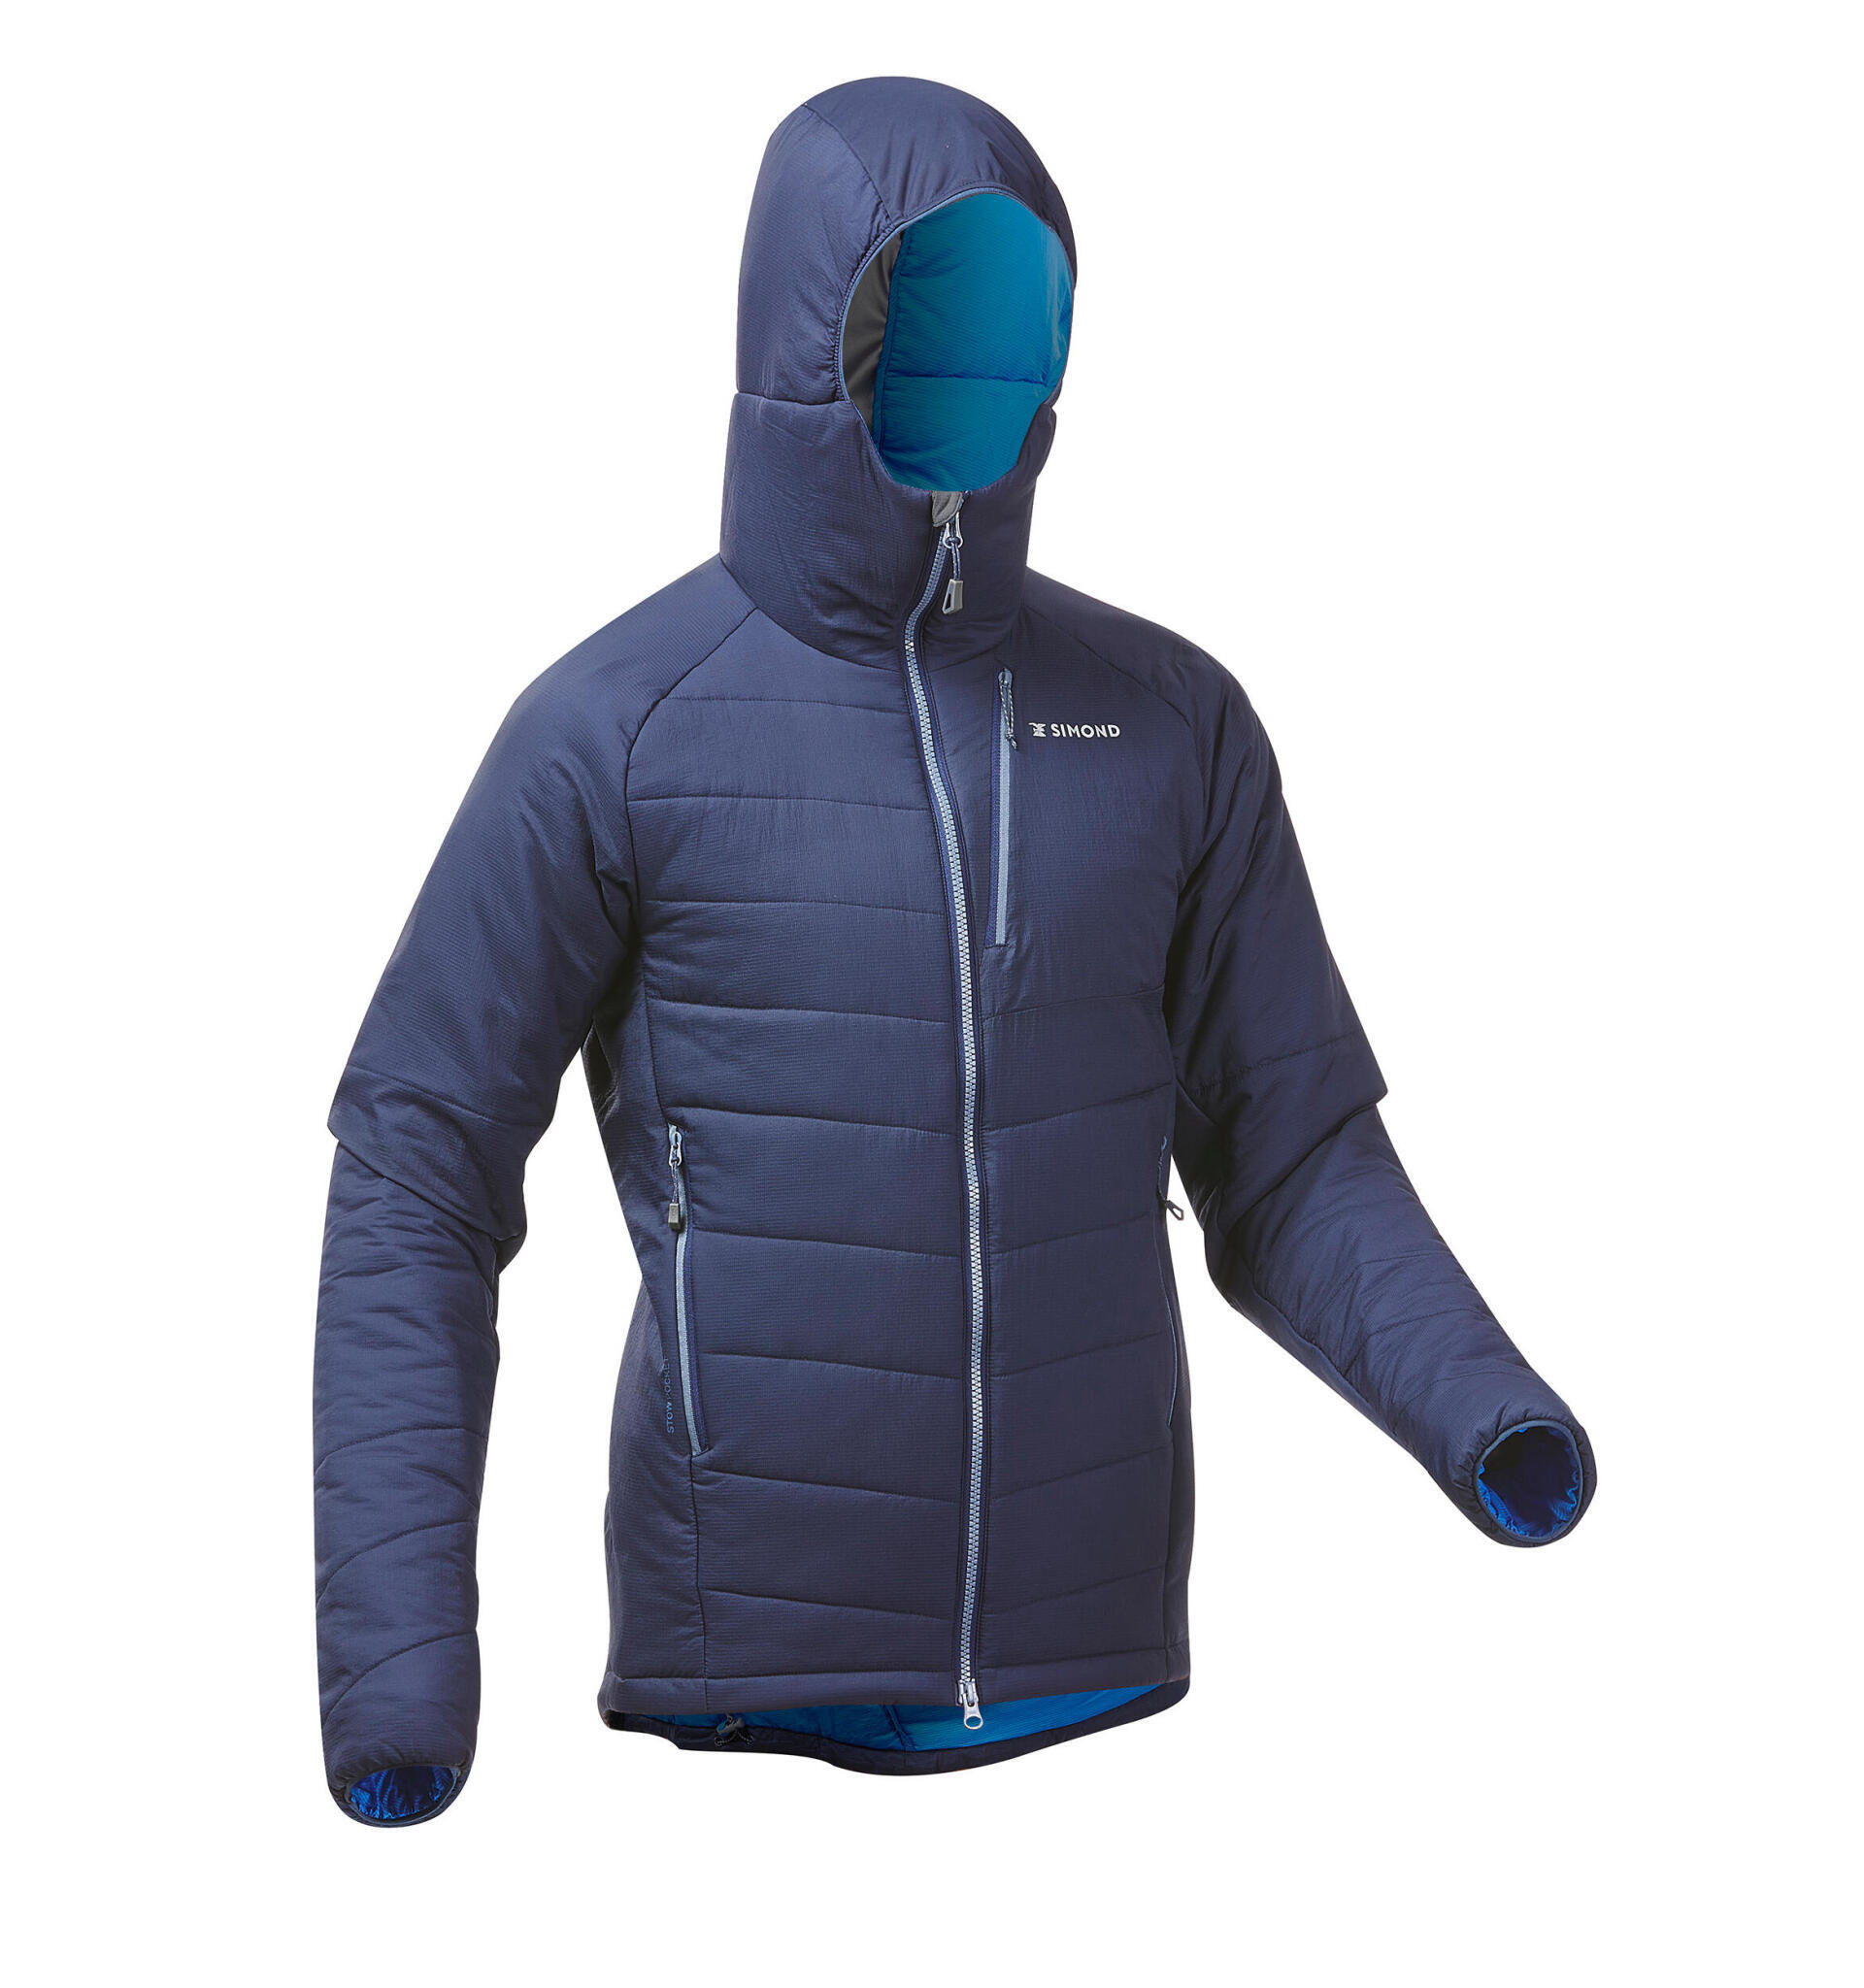 Performance pack - winter mixed-terrain mountaineering